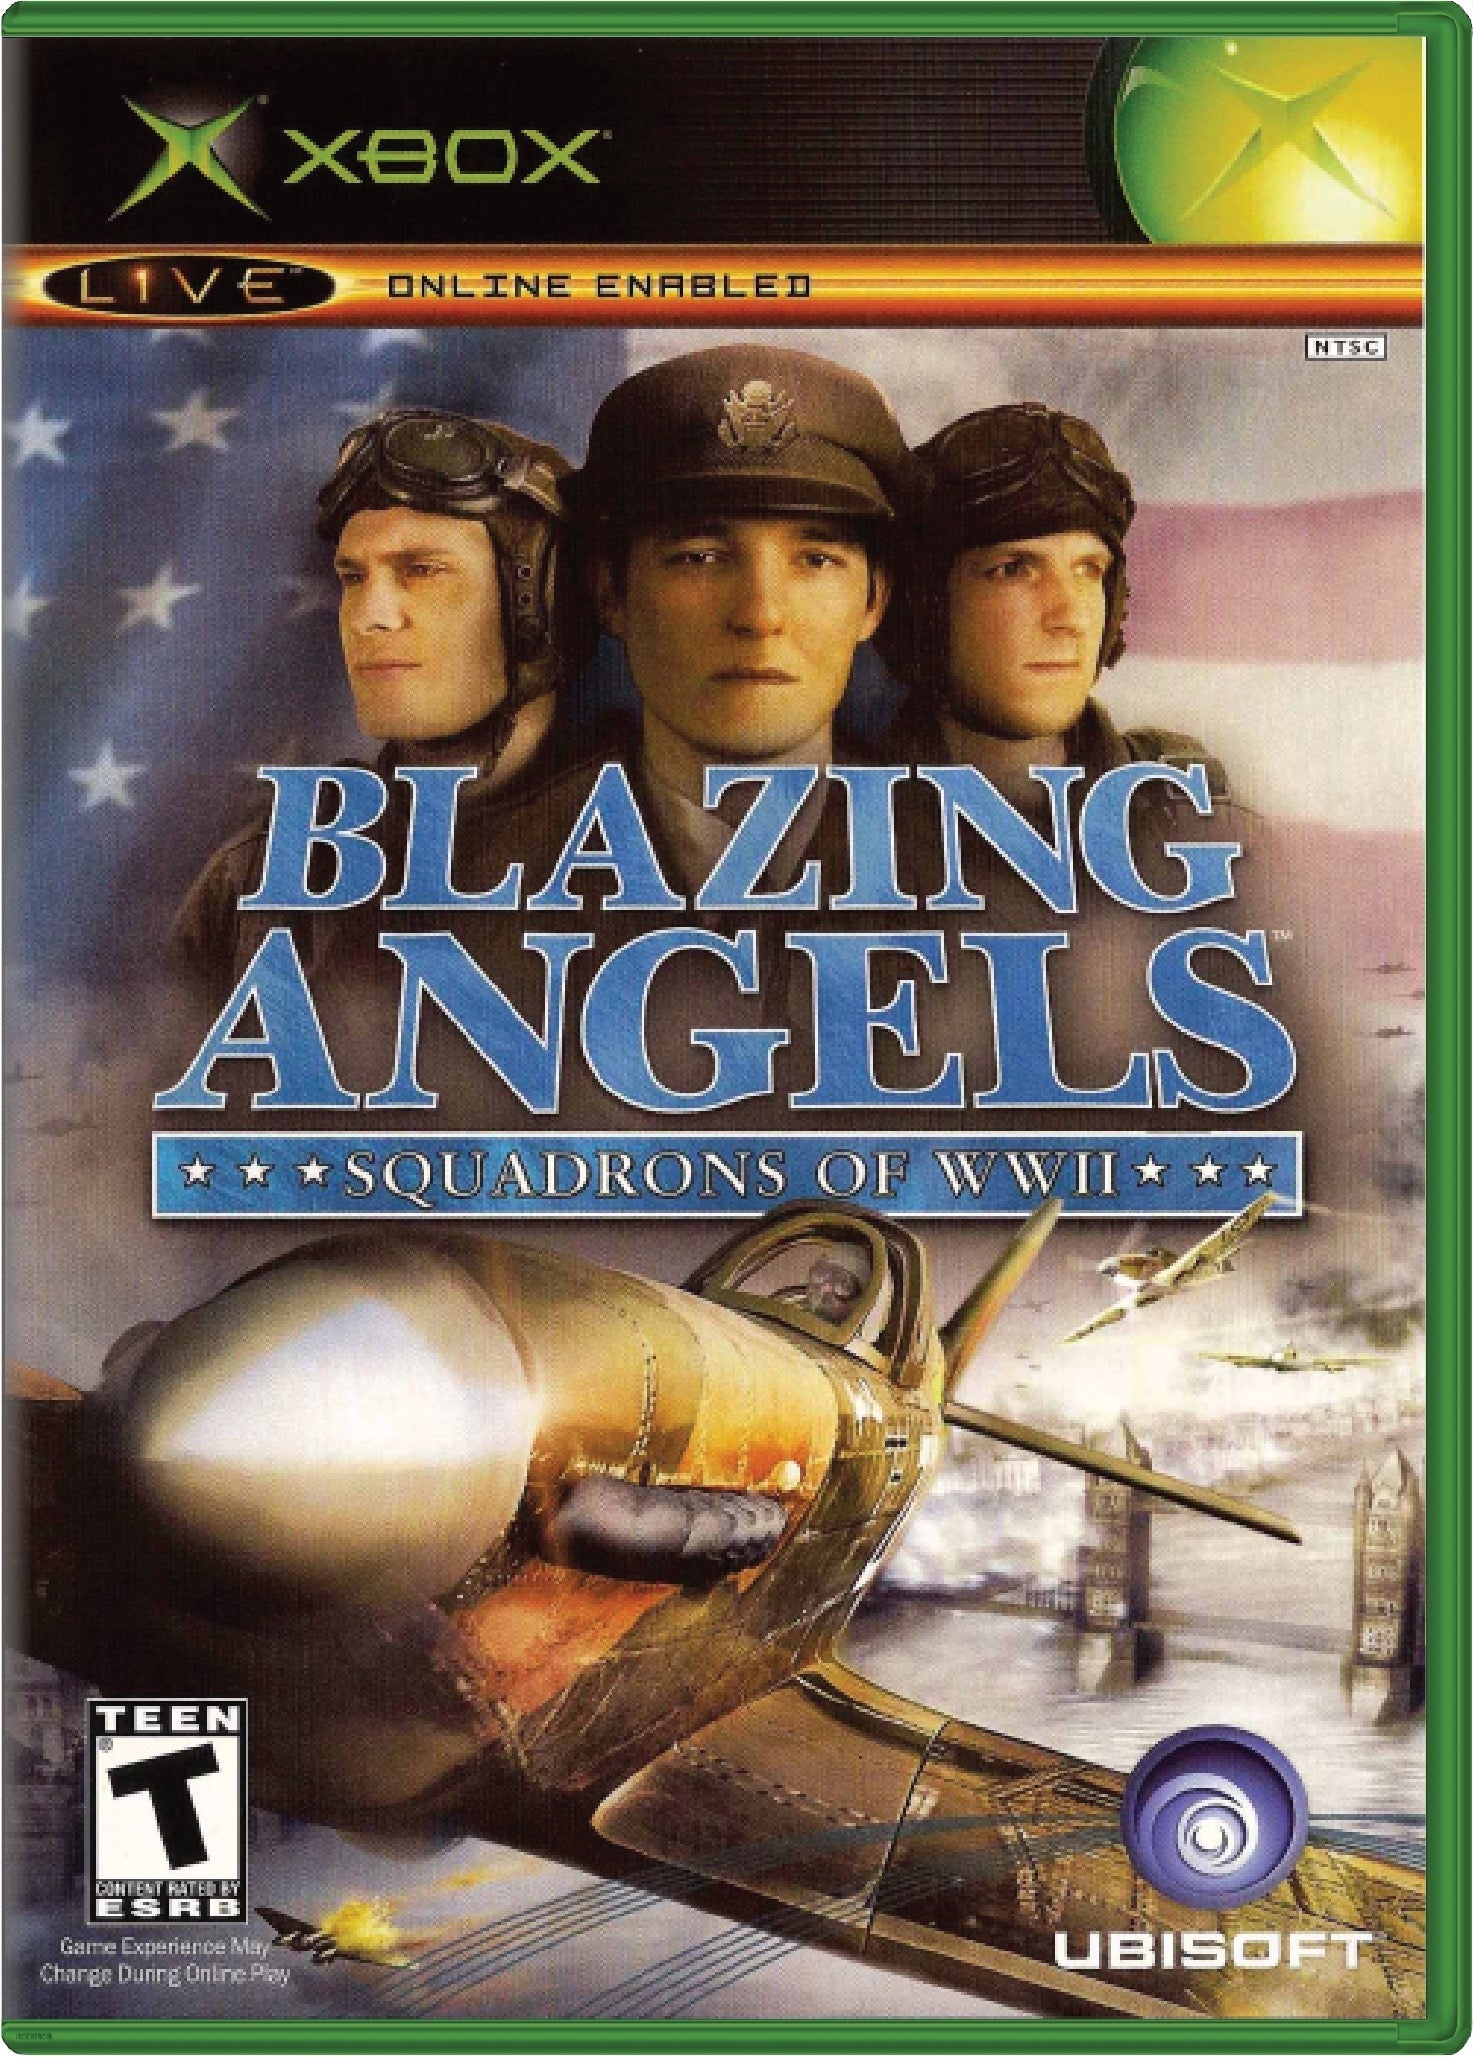 Blazing Angels Squadrons of WWII Cover Art